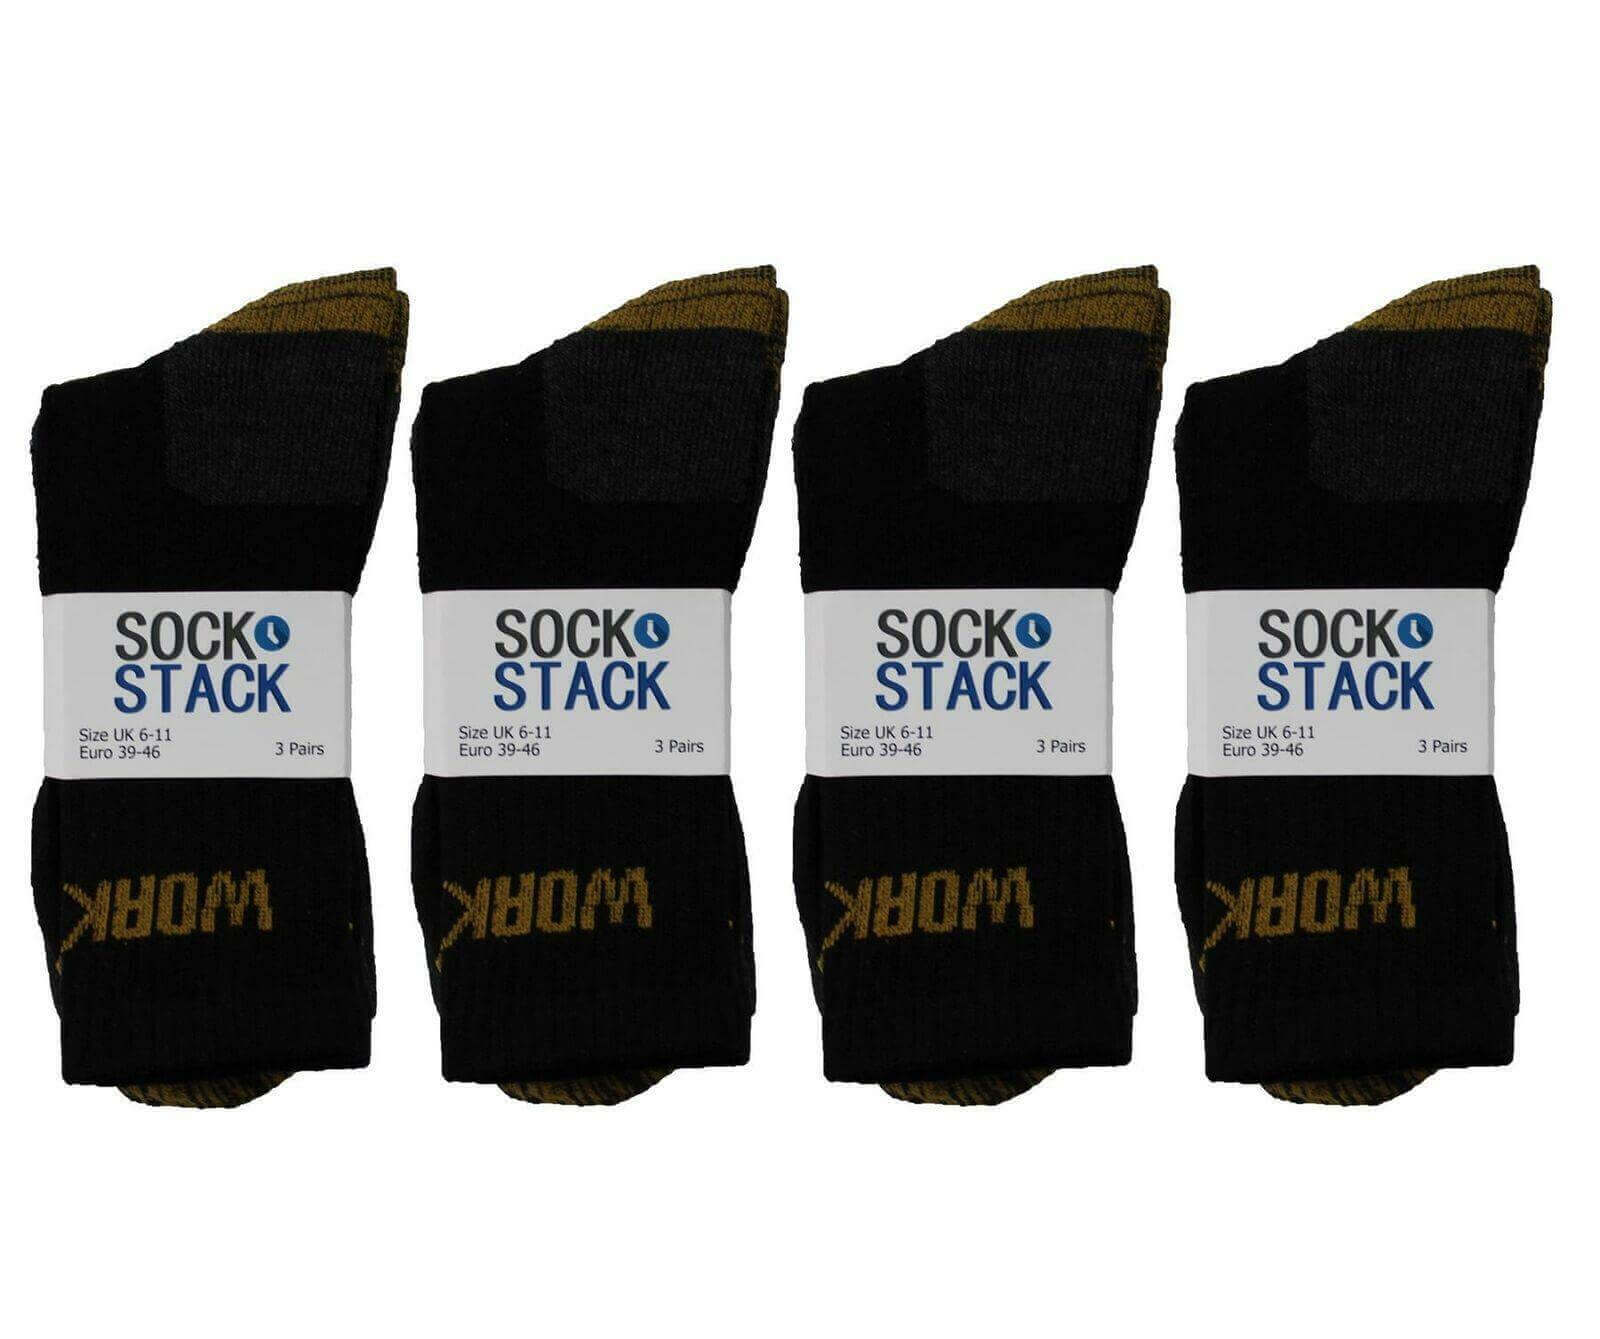 6 Pairs Men's Work Socks Cushion Sole Reinforced Toe Boot Socks. Buy now for £7.00. A Socks by Sock Stack. 6-11, assorted, athletics, boot, comfortable, cosy, cotton, cushion sole, elastane, mens, mens socks, outdoor, polyester, socks, soft, sports, Ultim